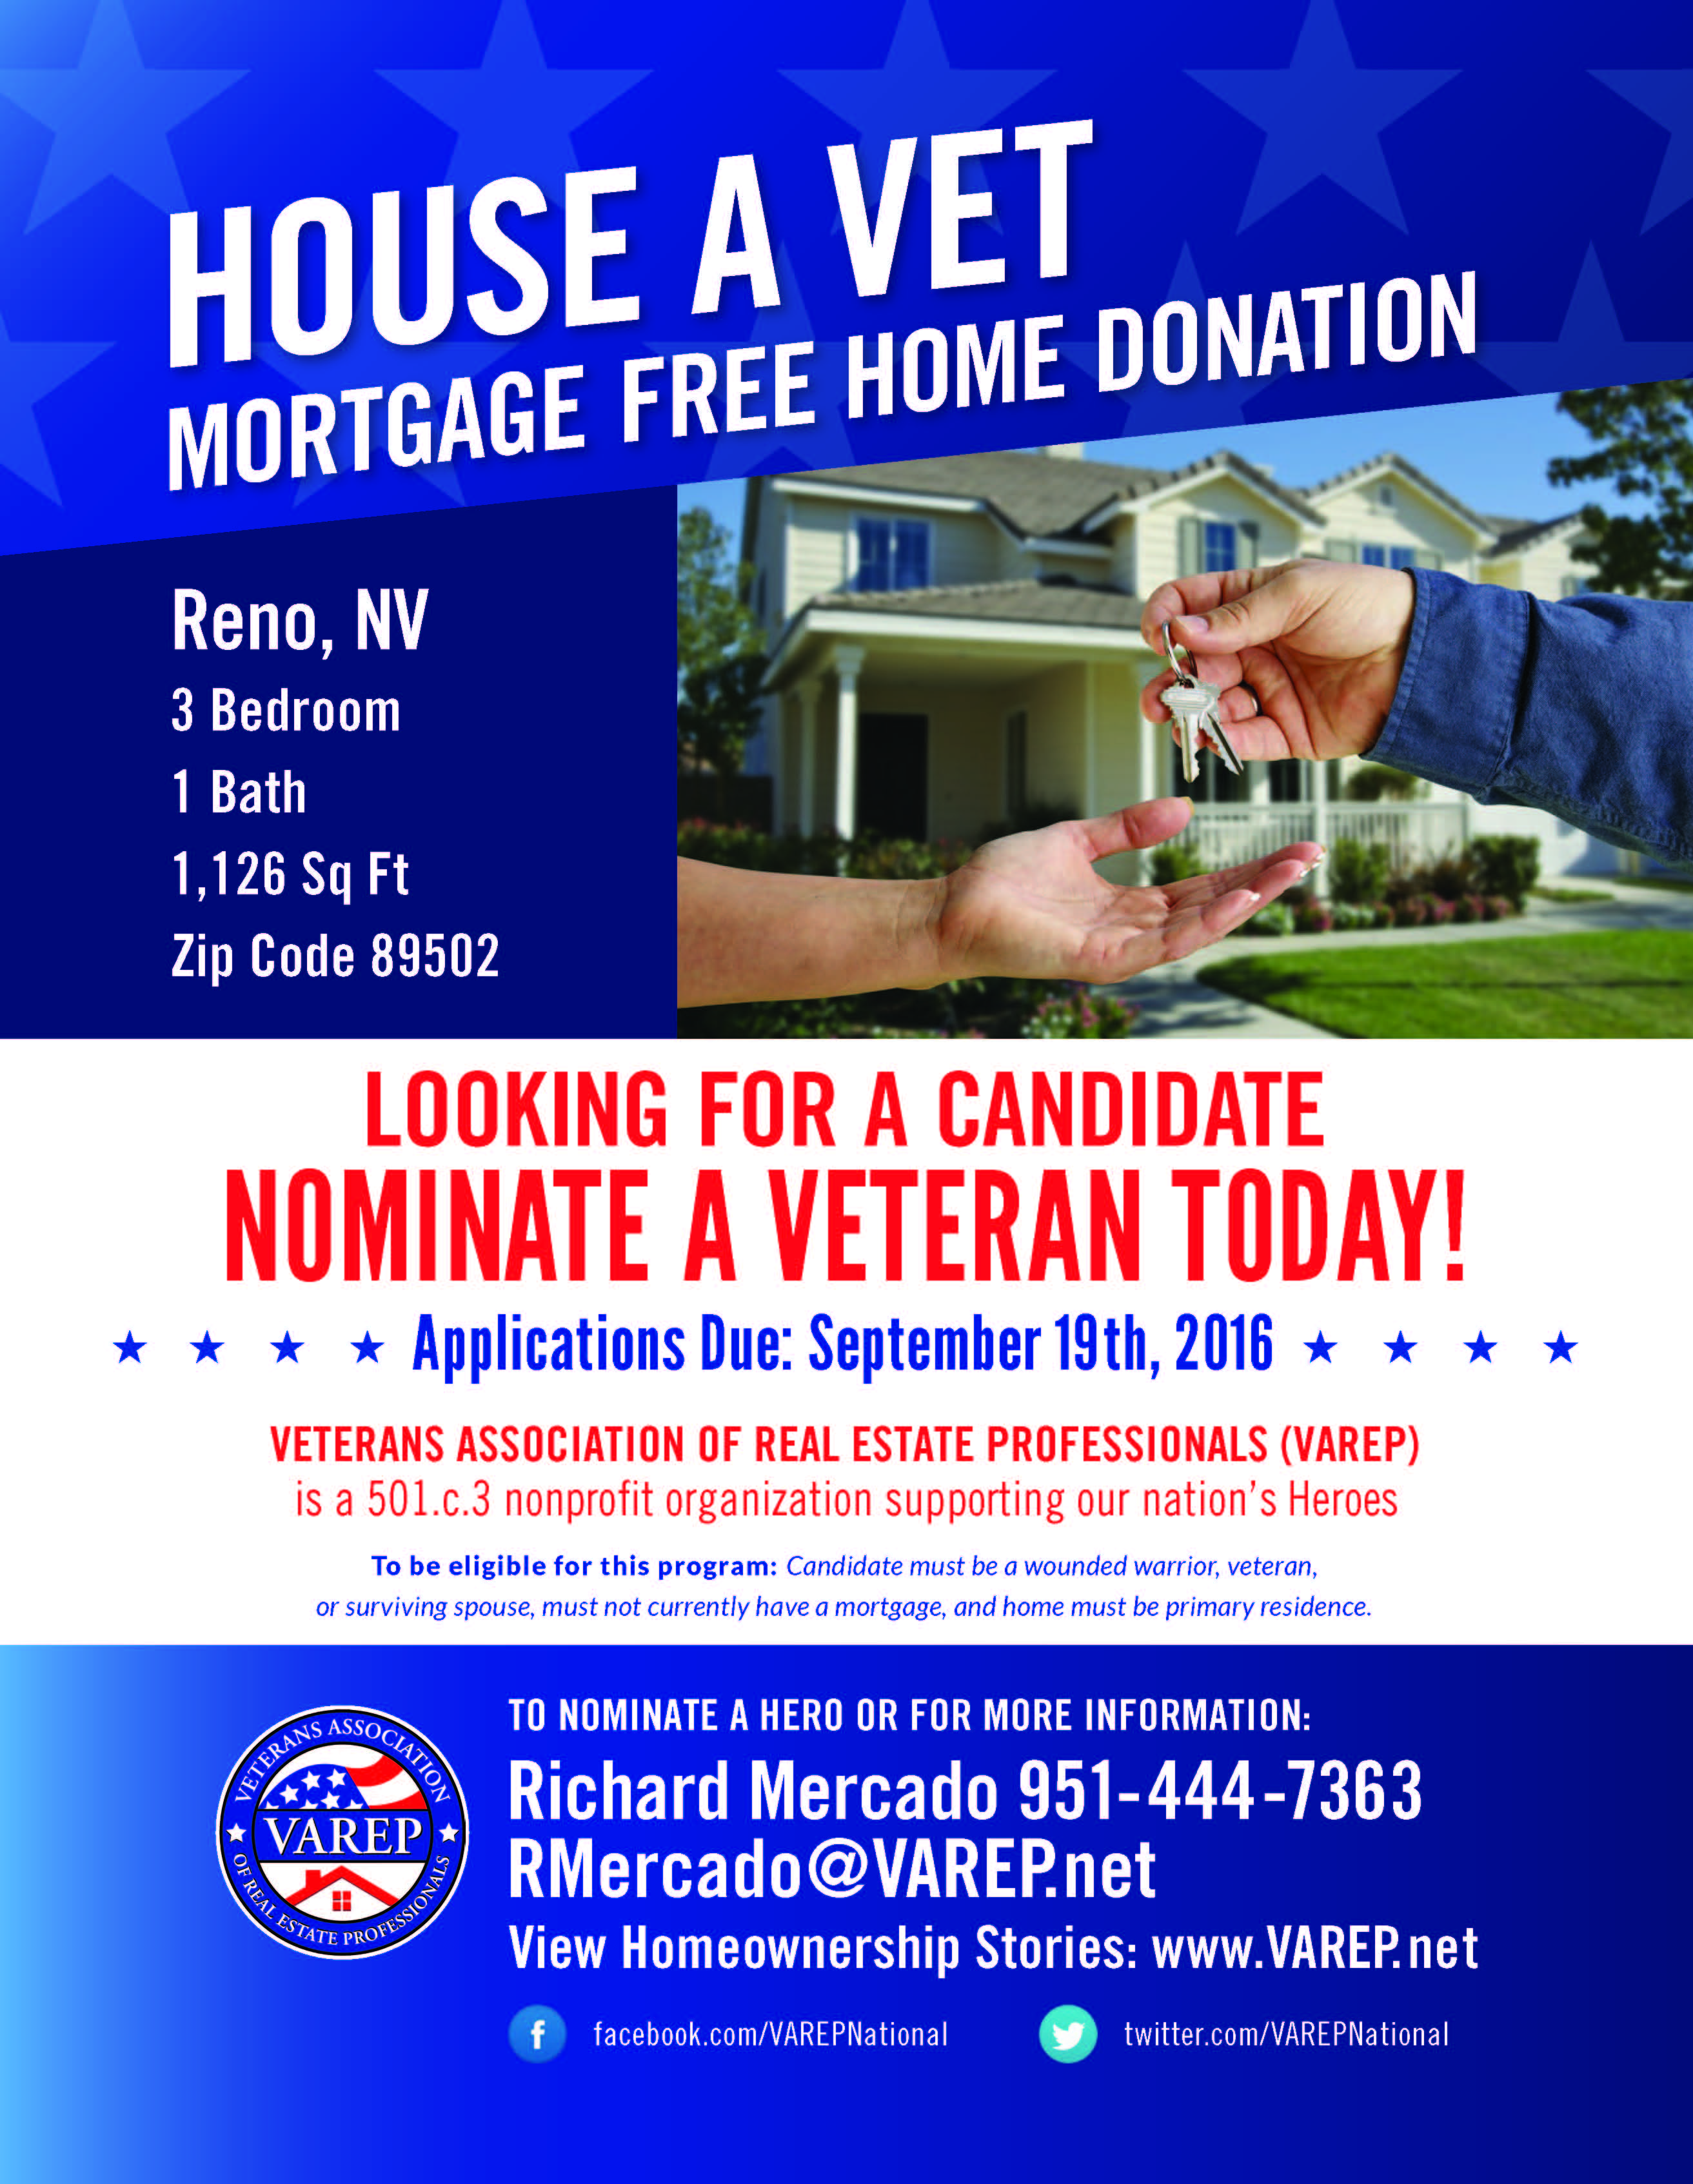 House a Vet: Mortgage Free Home Donation